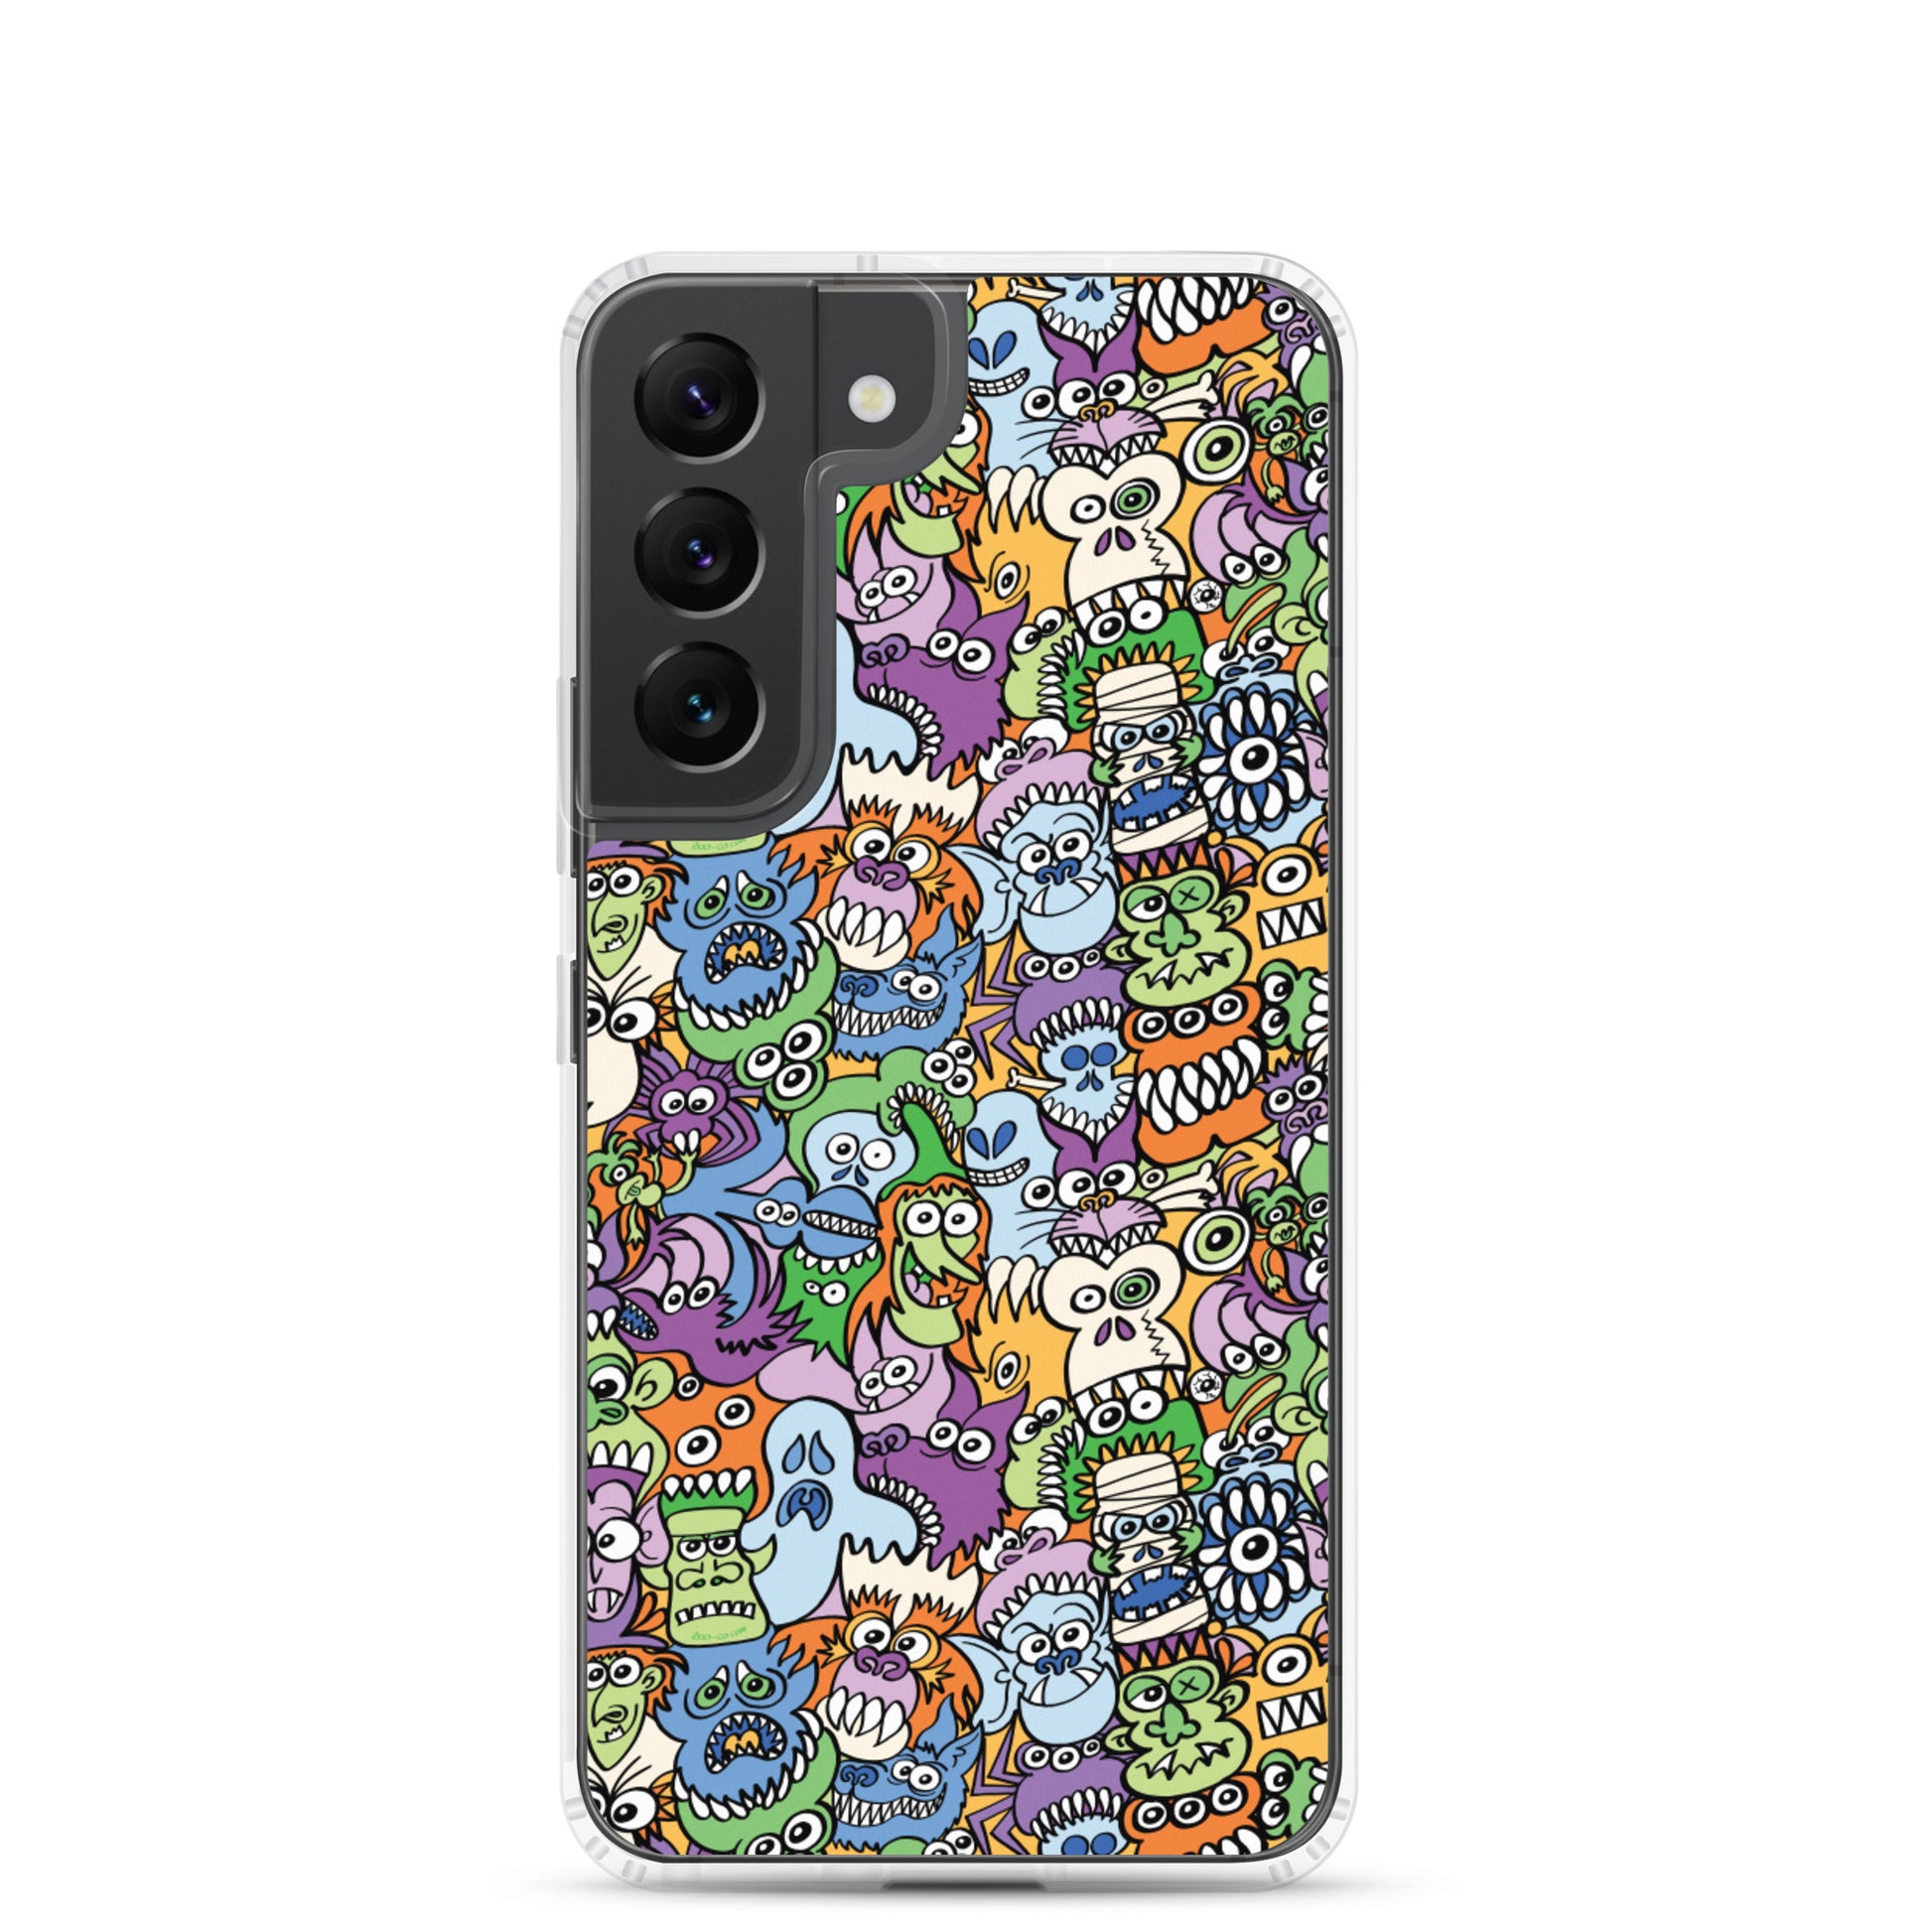 All the spooky Halloween monsters in a pattern design Samsung Case. s22